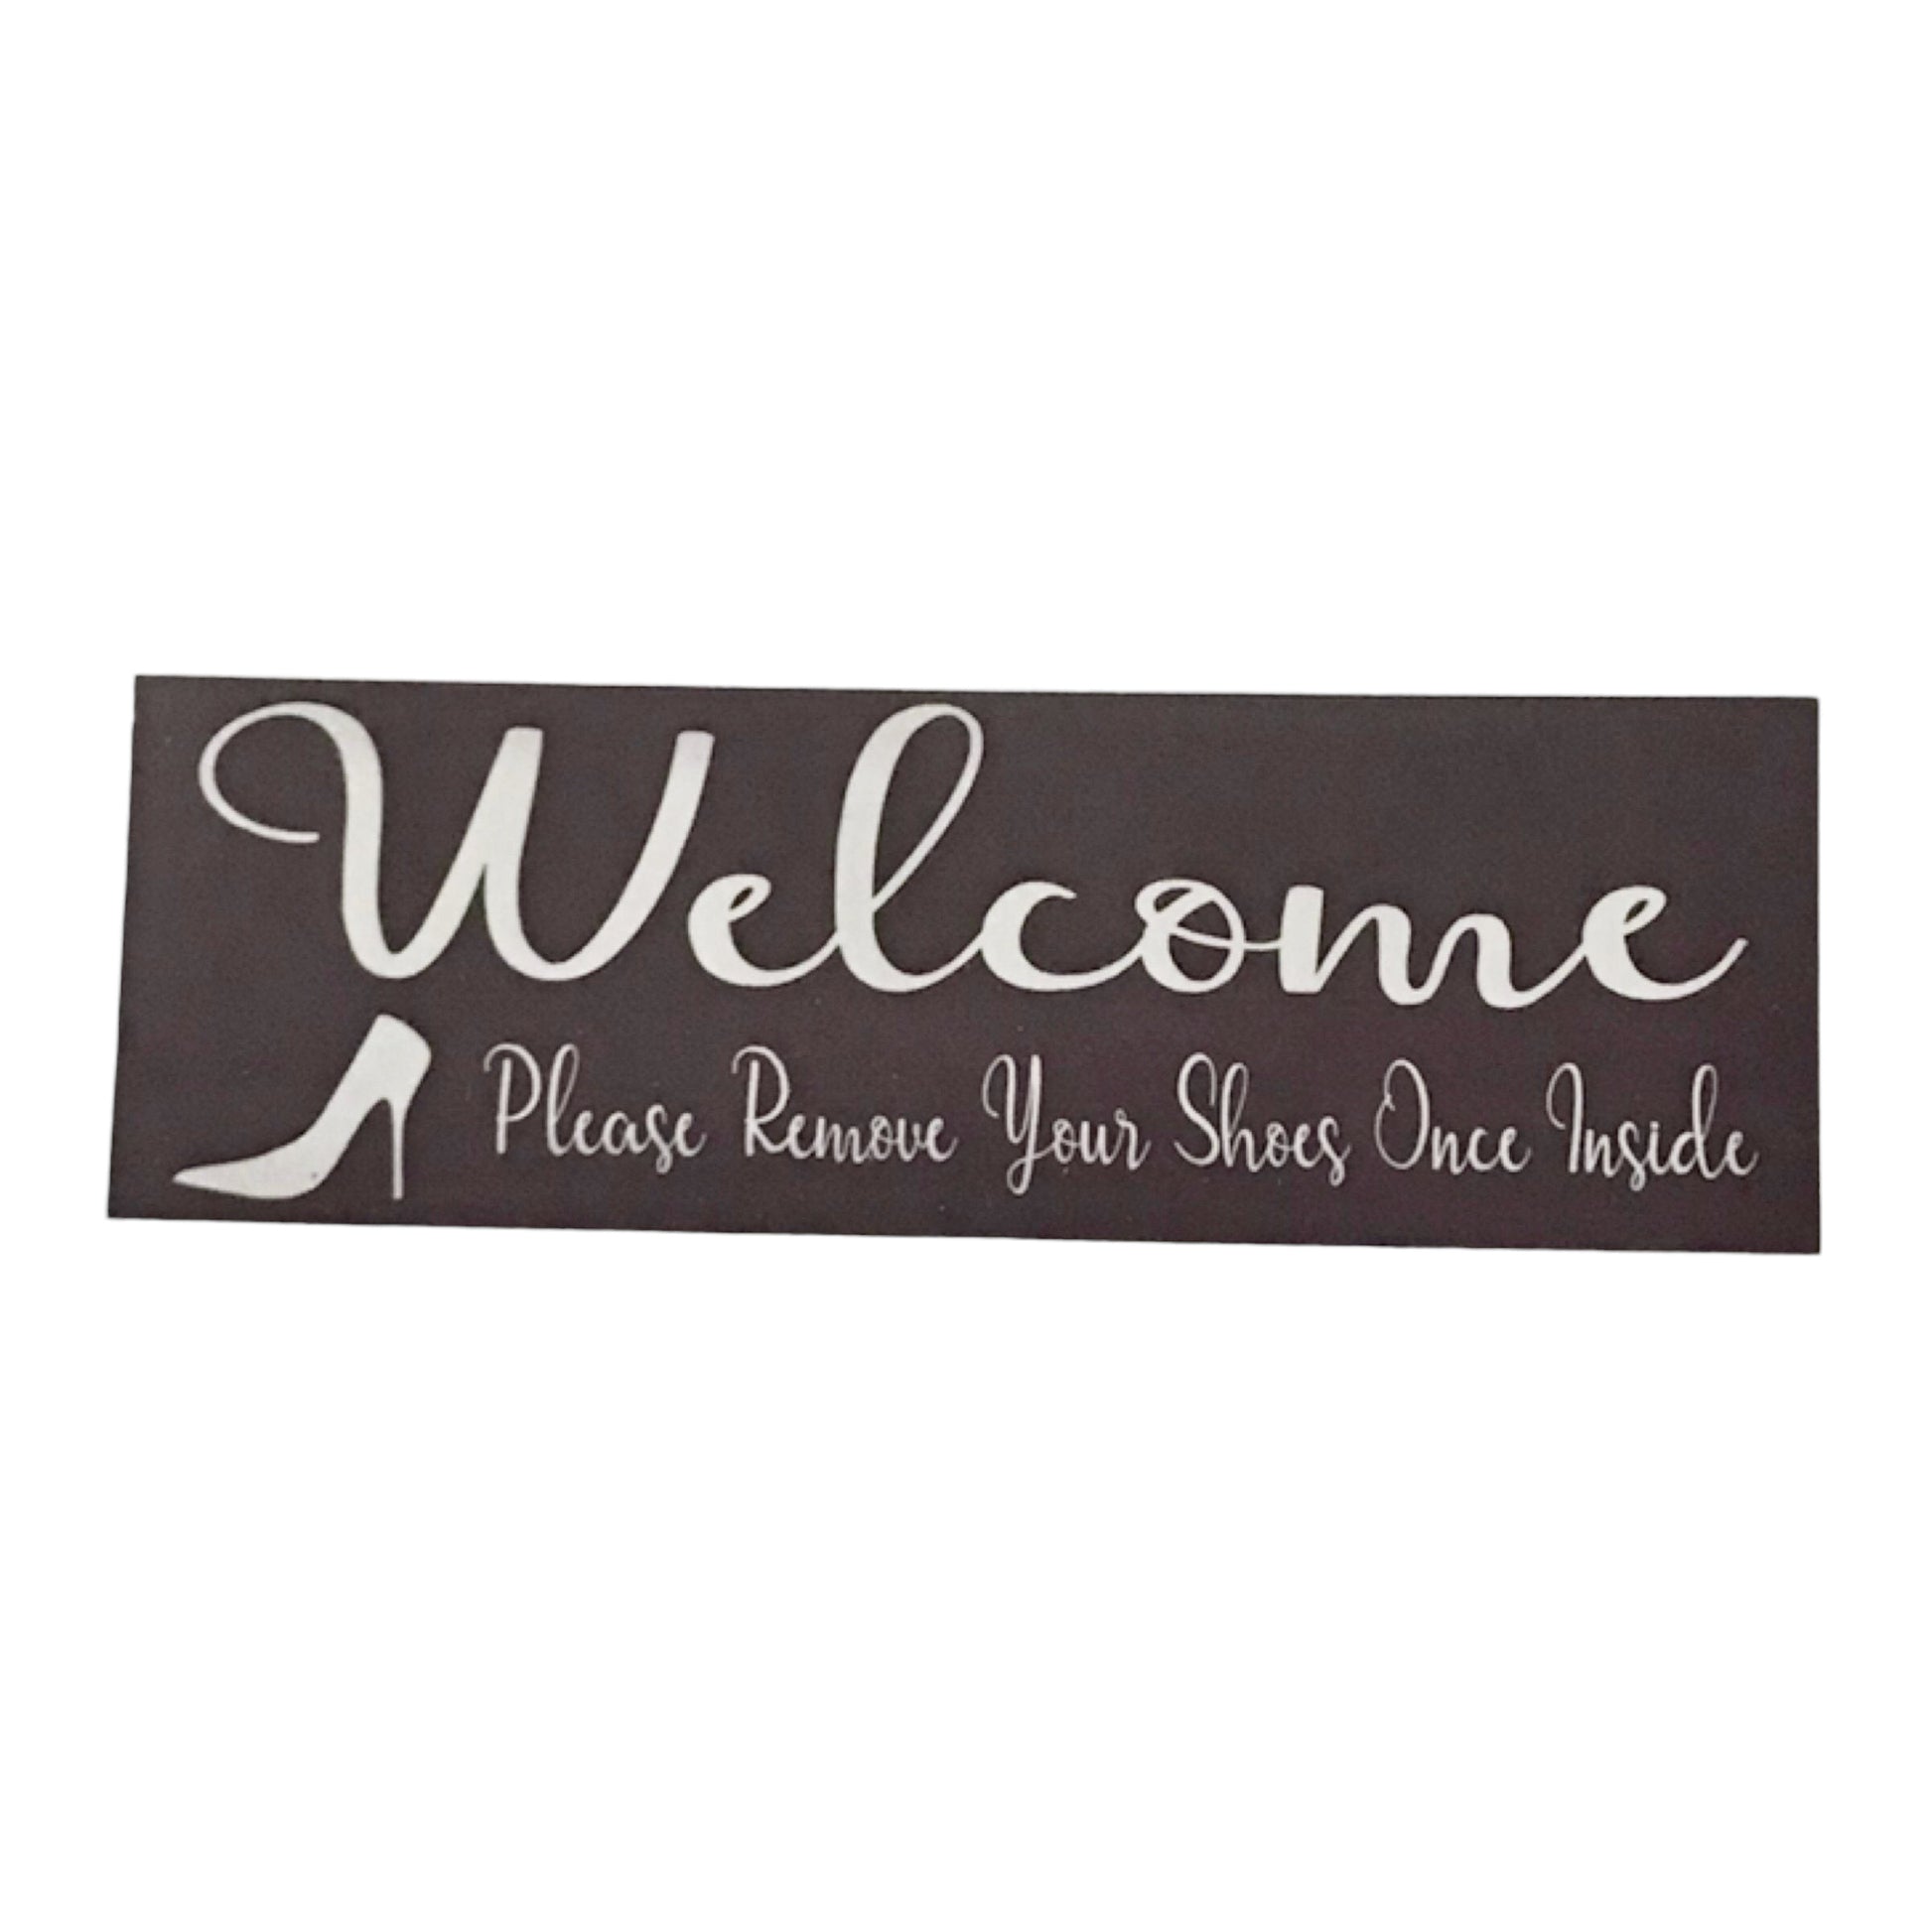 Welcome Please Remove Your Shoes Once Inside Sign - The Renmy Store Homewares & Gifts 